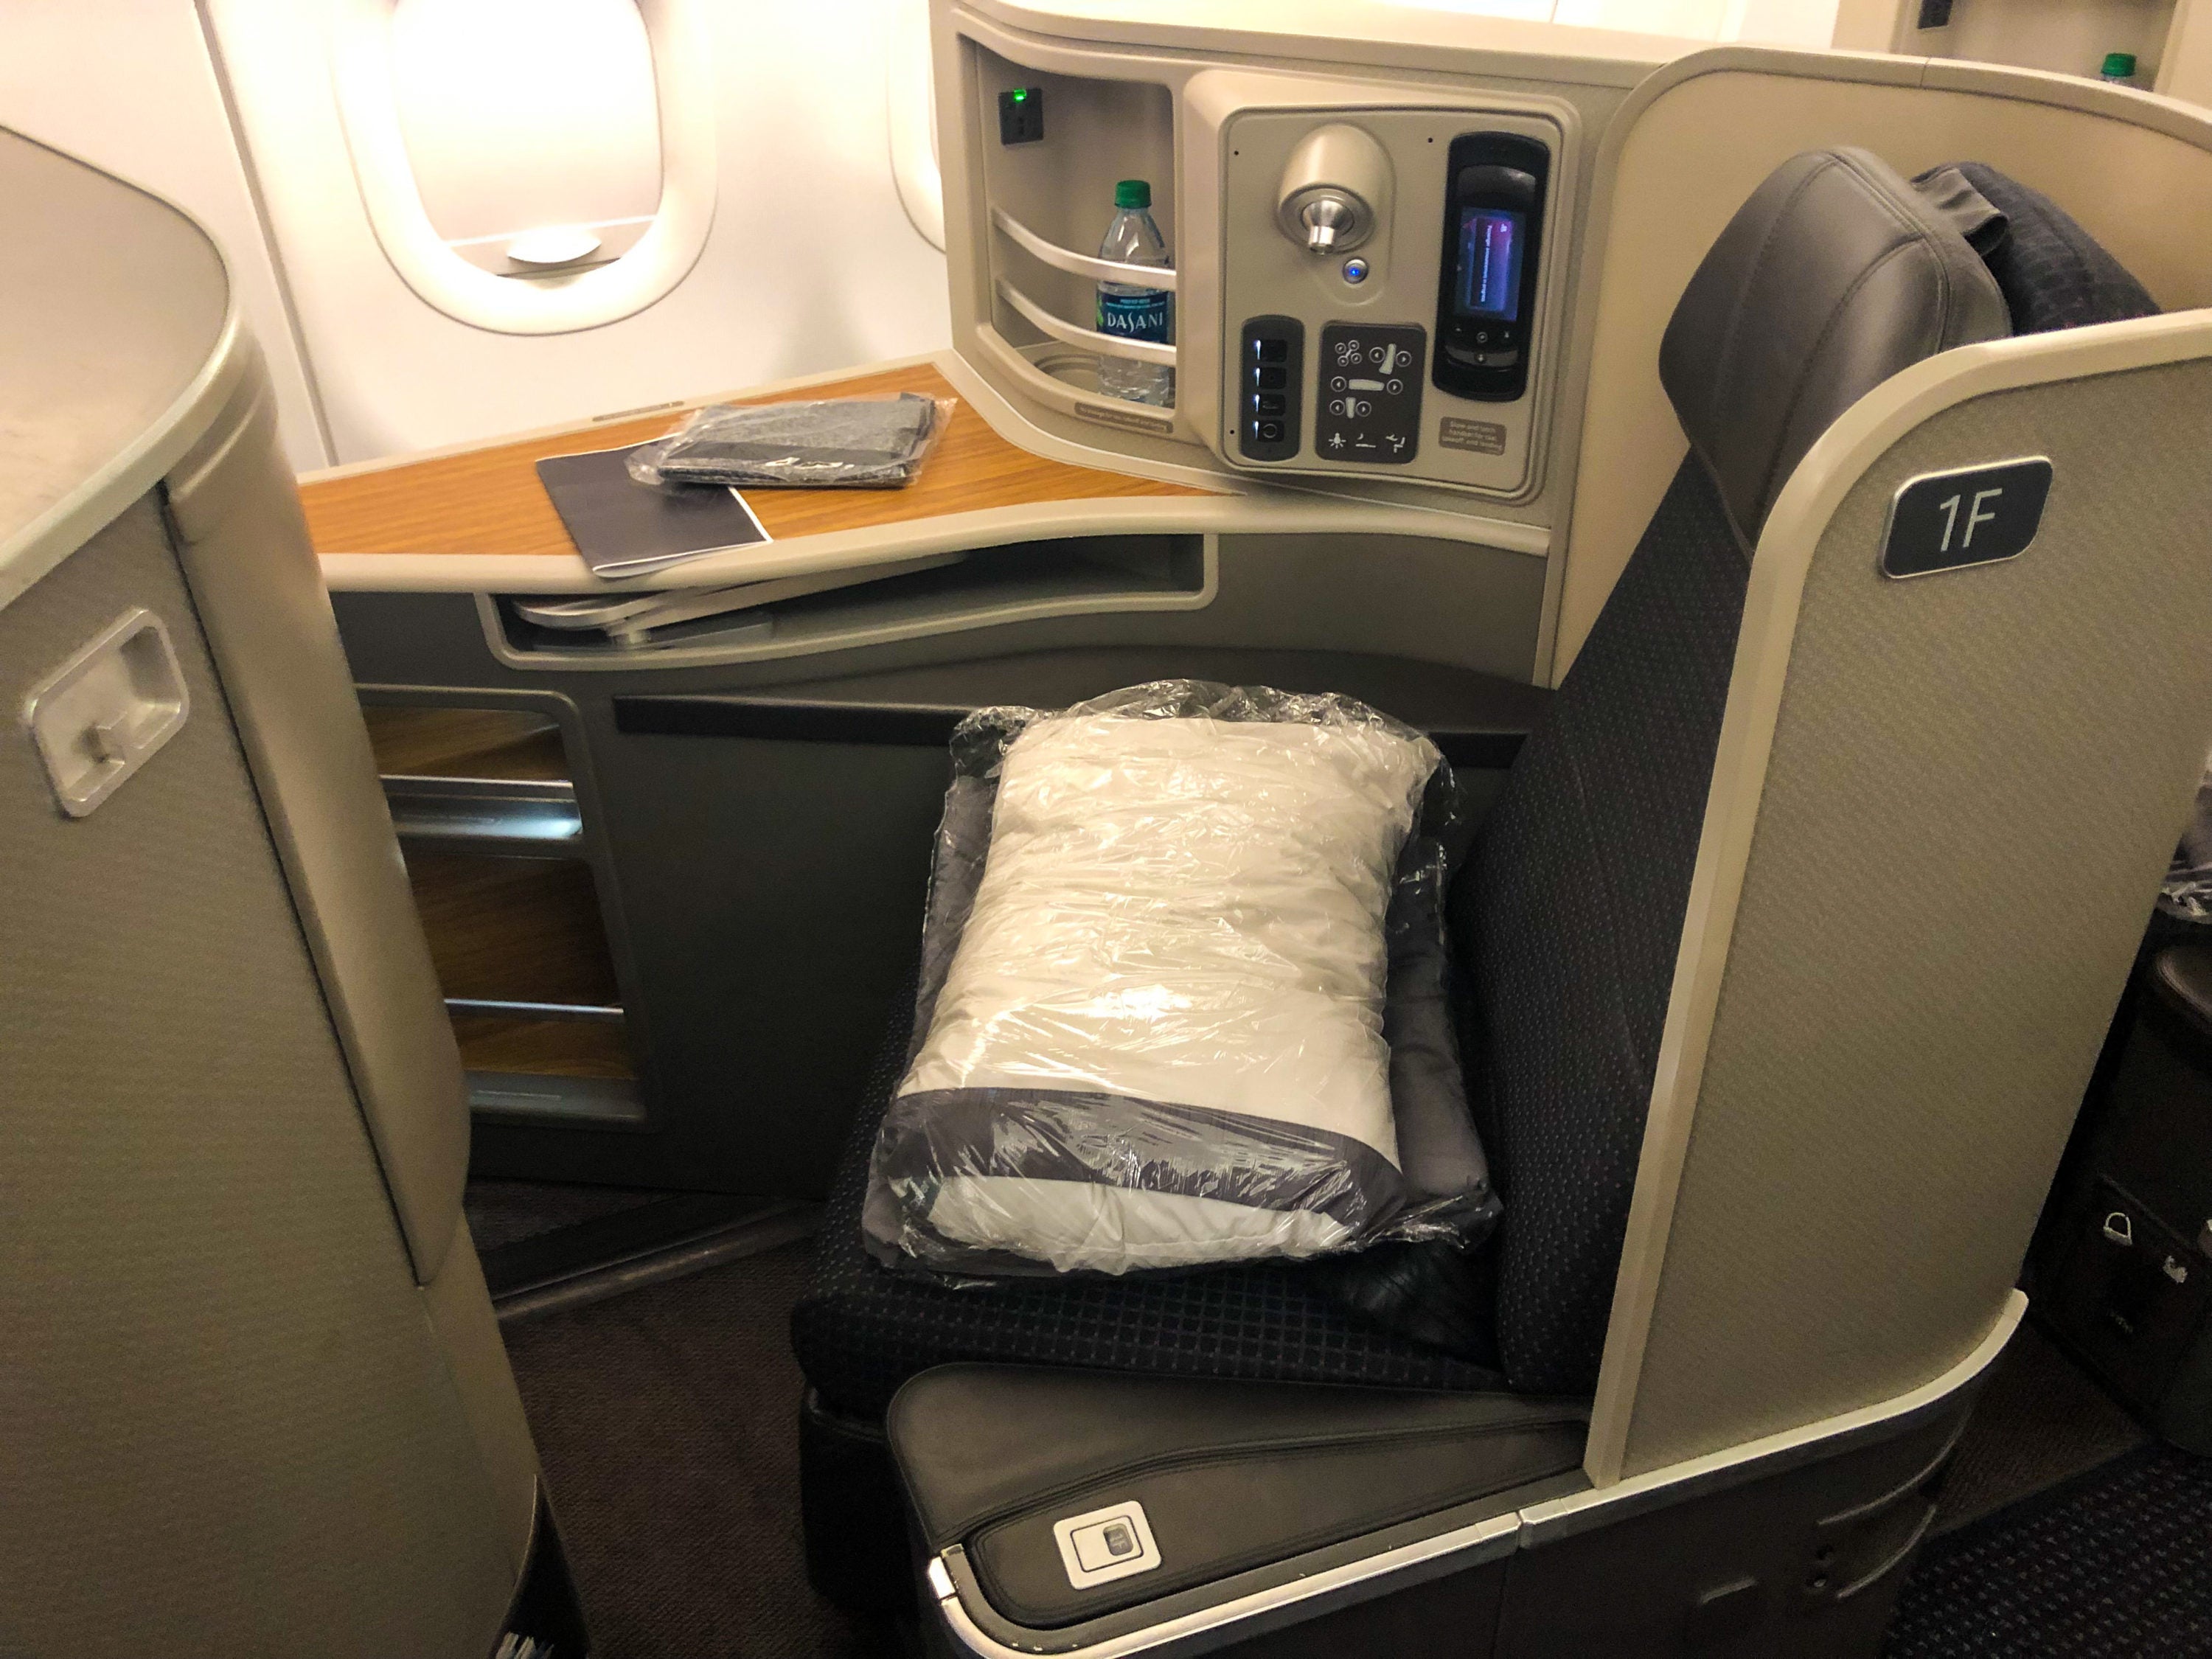 American Airlines Flagship First Class A321T seat 1F